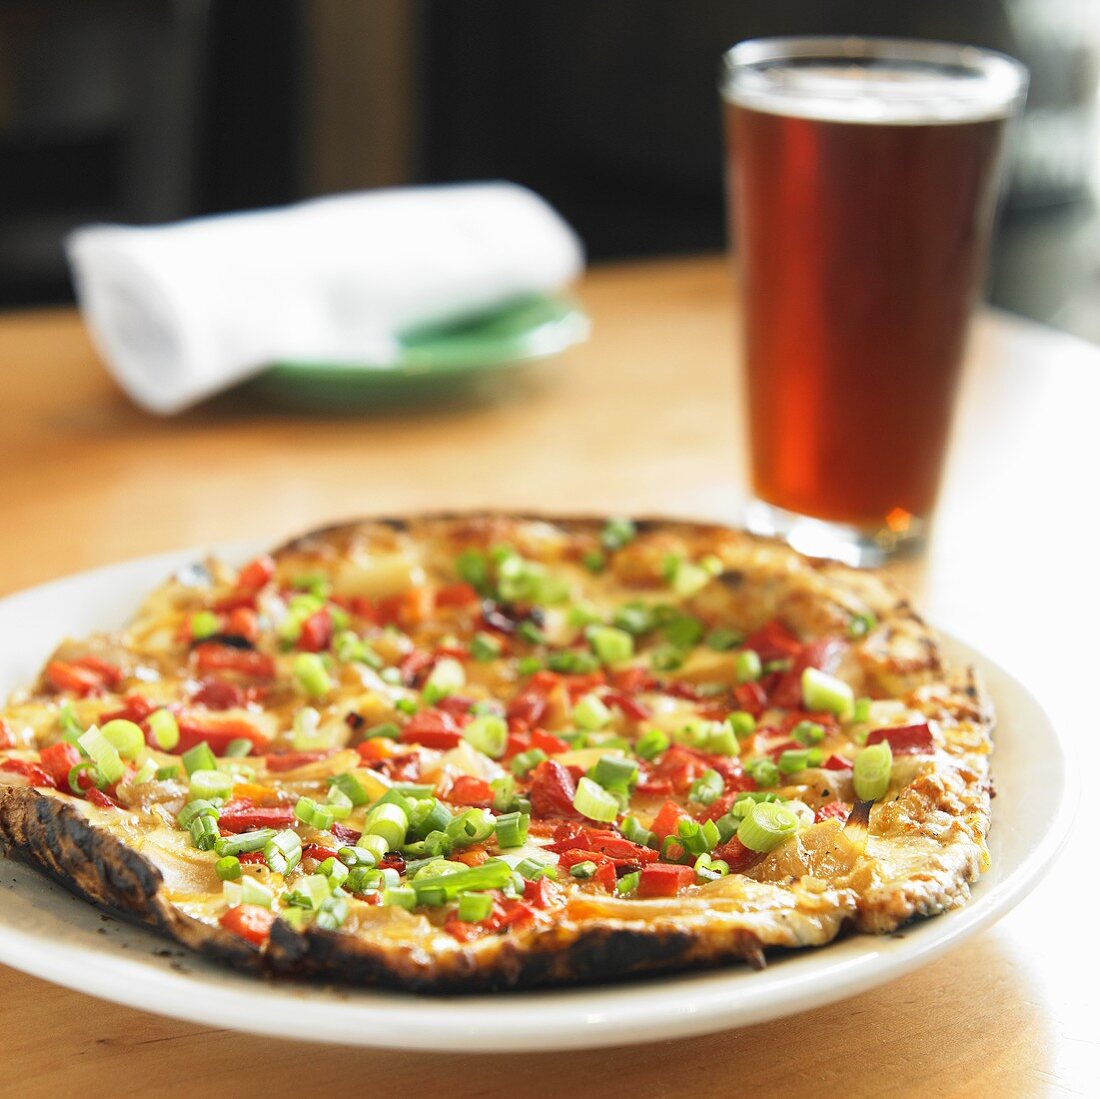 Scallion and Red Pepper Pizza; Beer